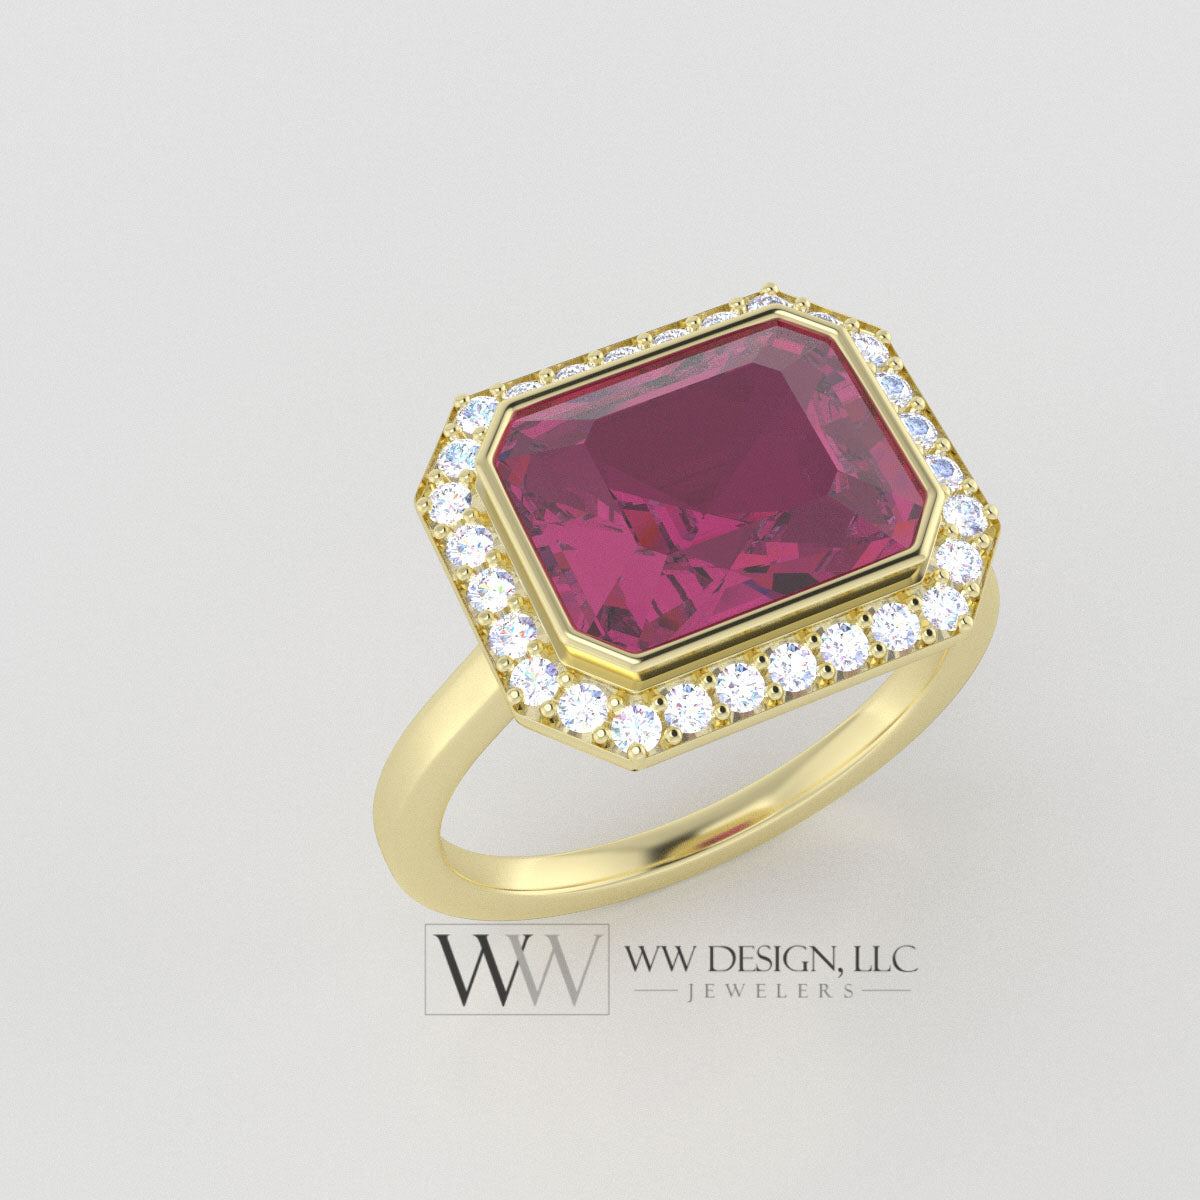 Genuine 4.25ct Pink Mystic Topaz East West Emerald Shaped Ring with 0.28ctw Diamond Halo - 14k 18k Gold (Y, R,W) Platinum